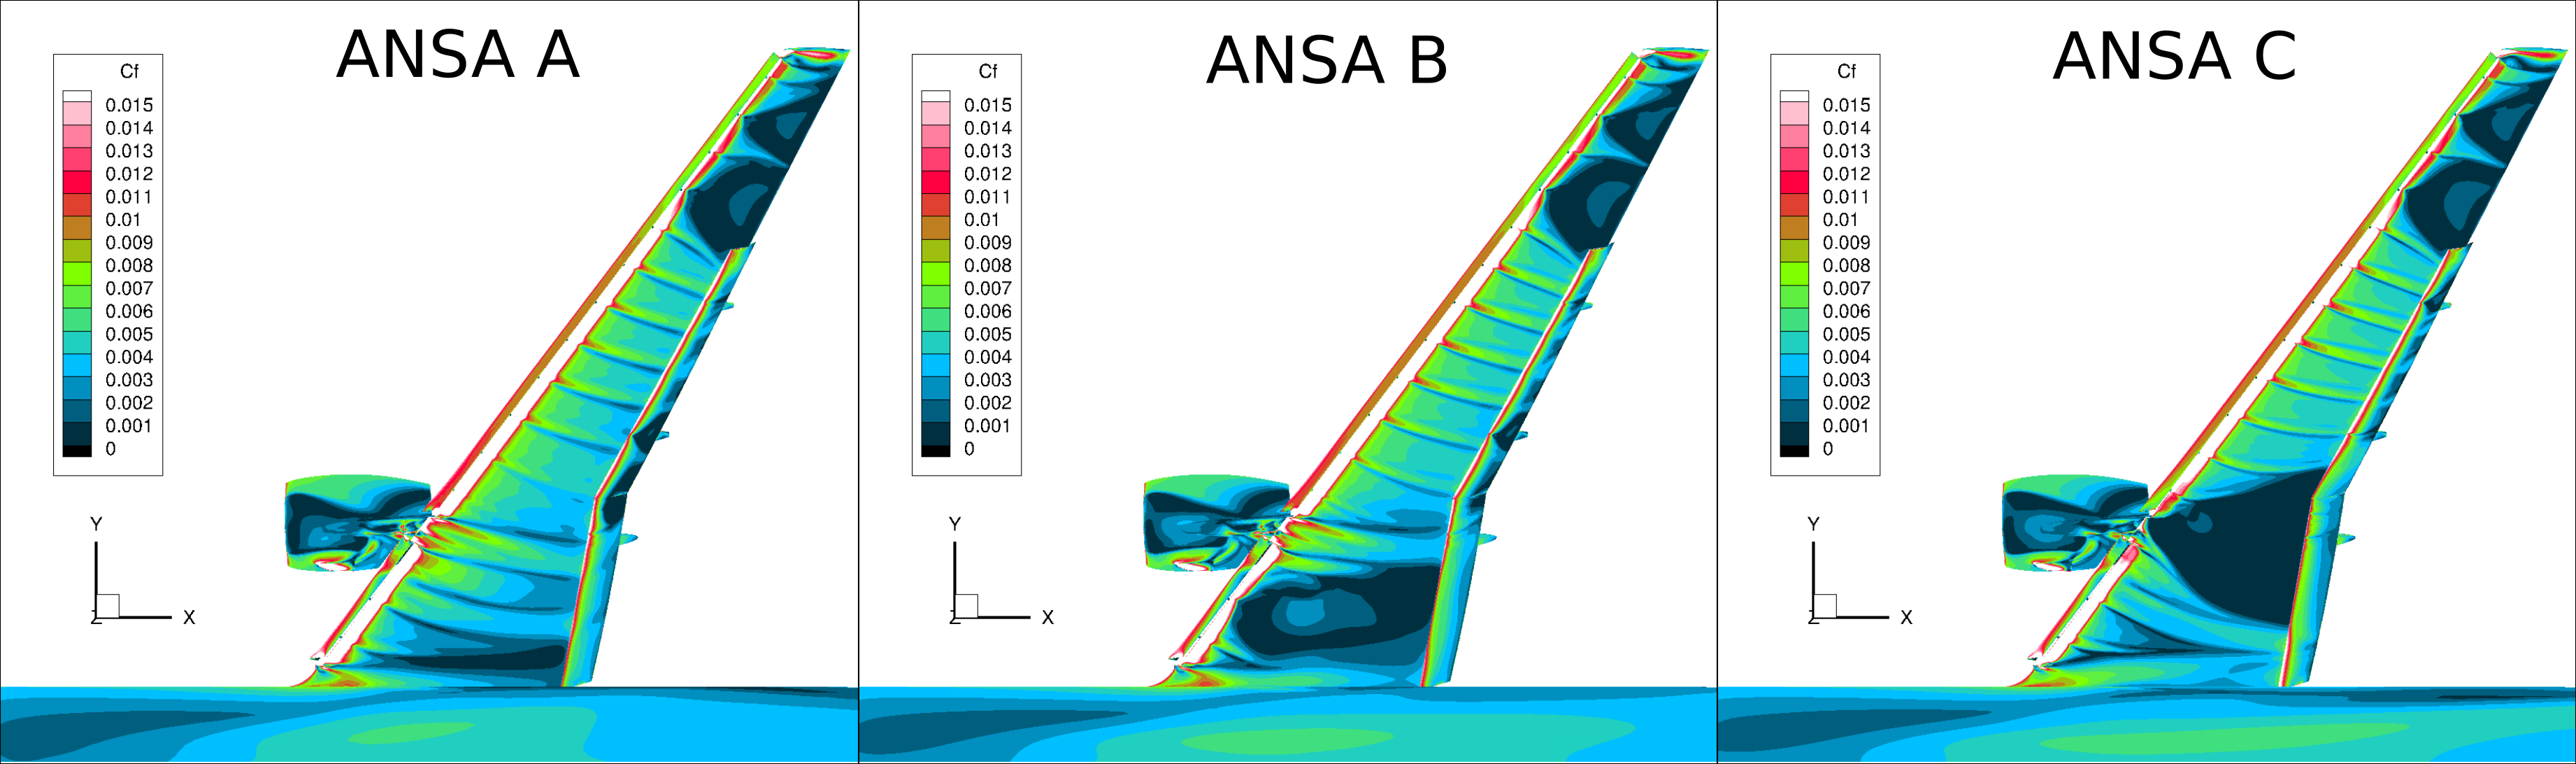 Skin friction distributions at ⍺=19.57° for different levels of ANSA grid refinement